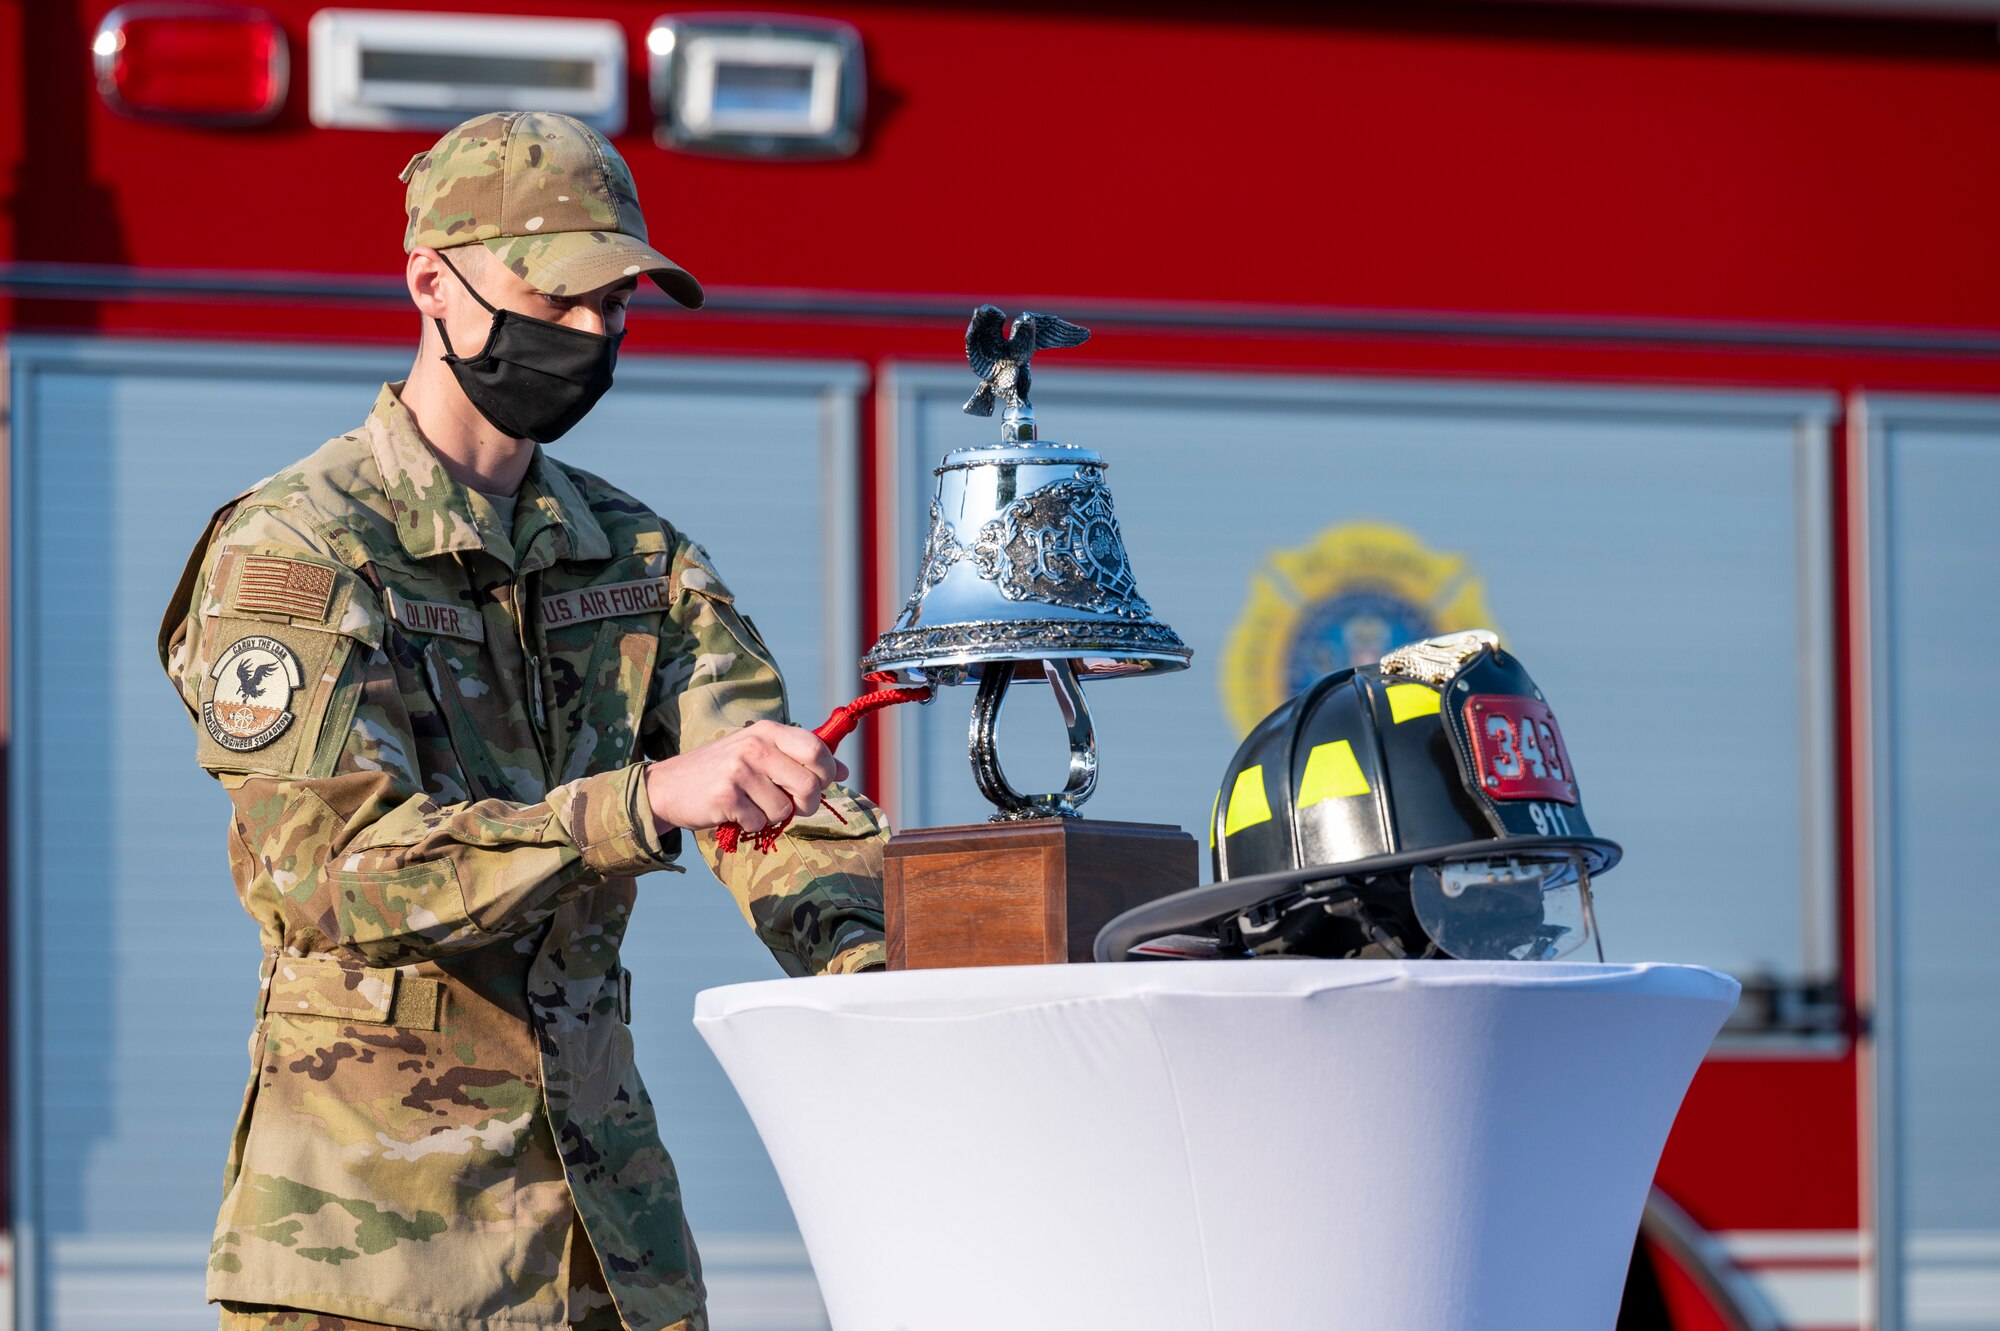 An Airman rings a ceremonial bell during a ceremony